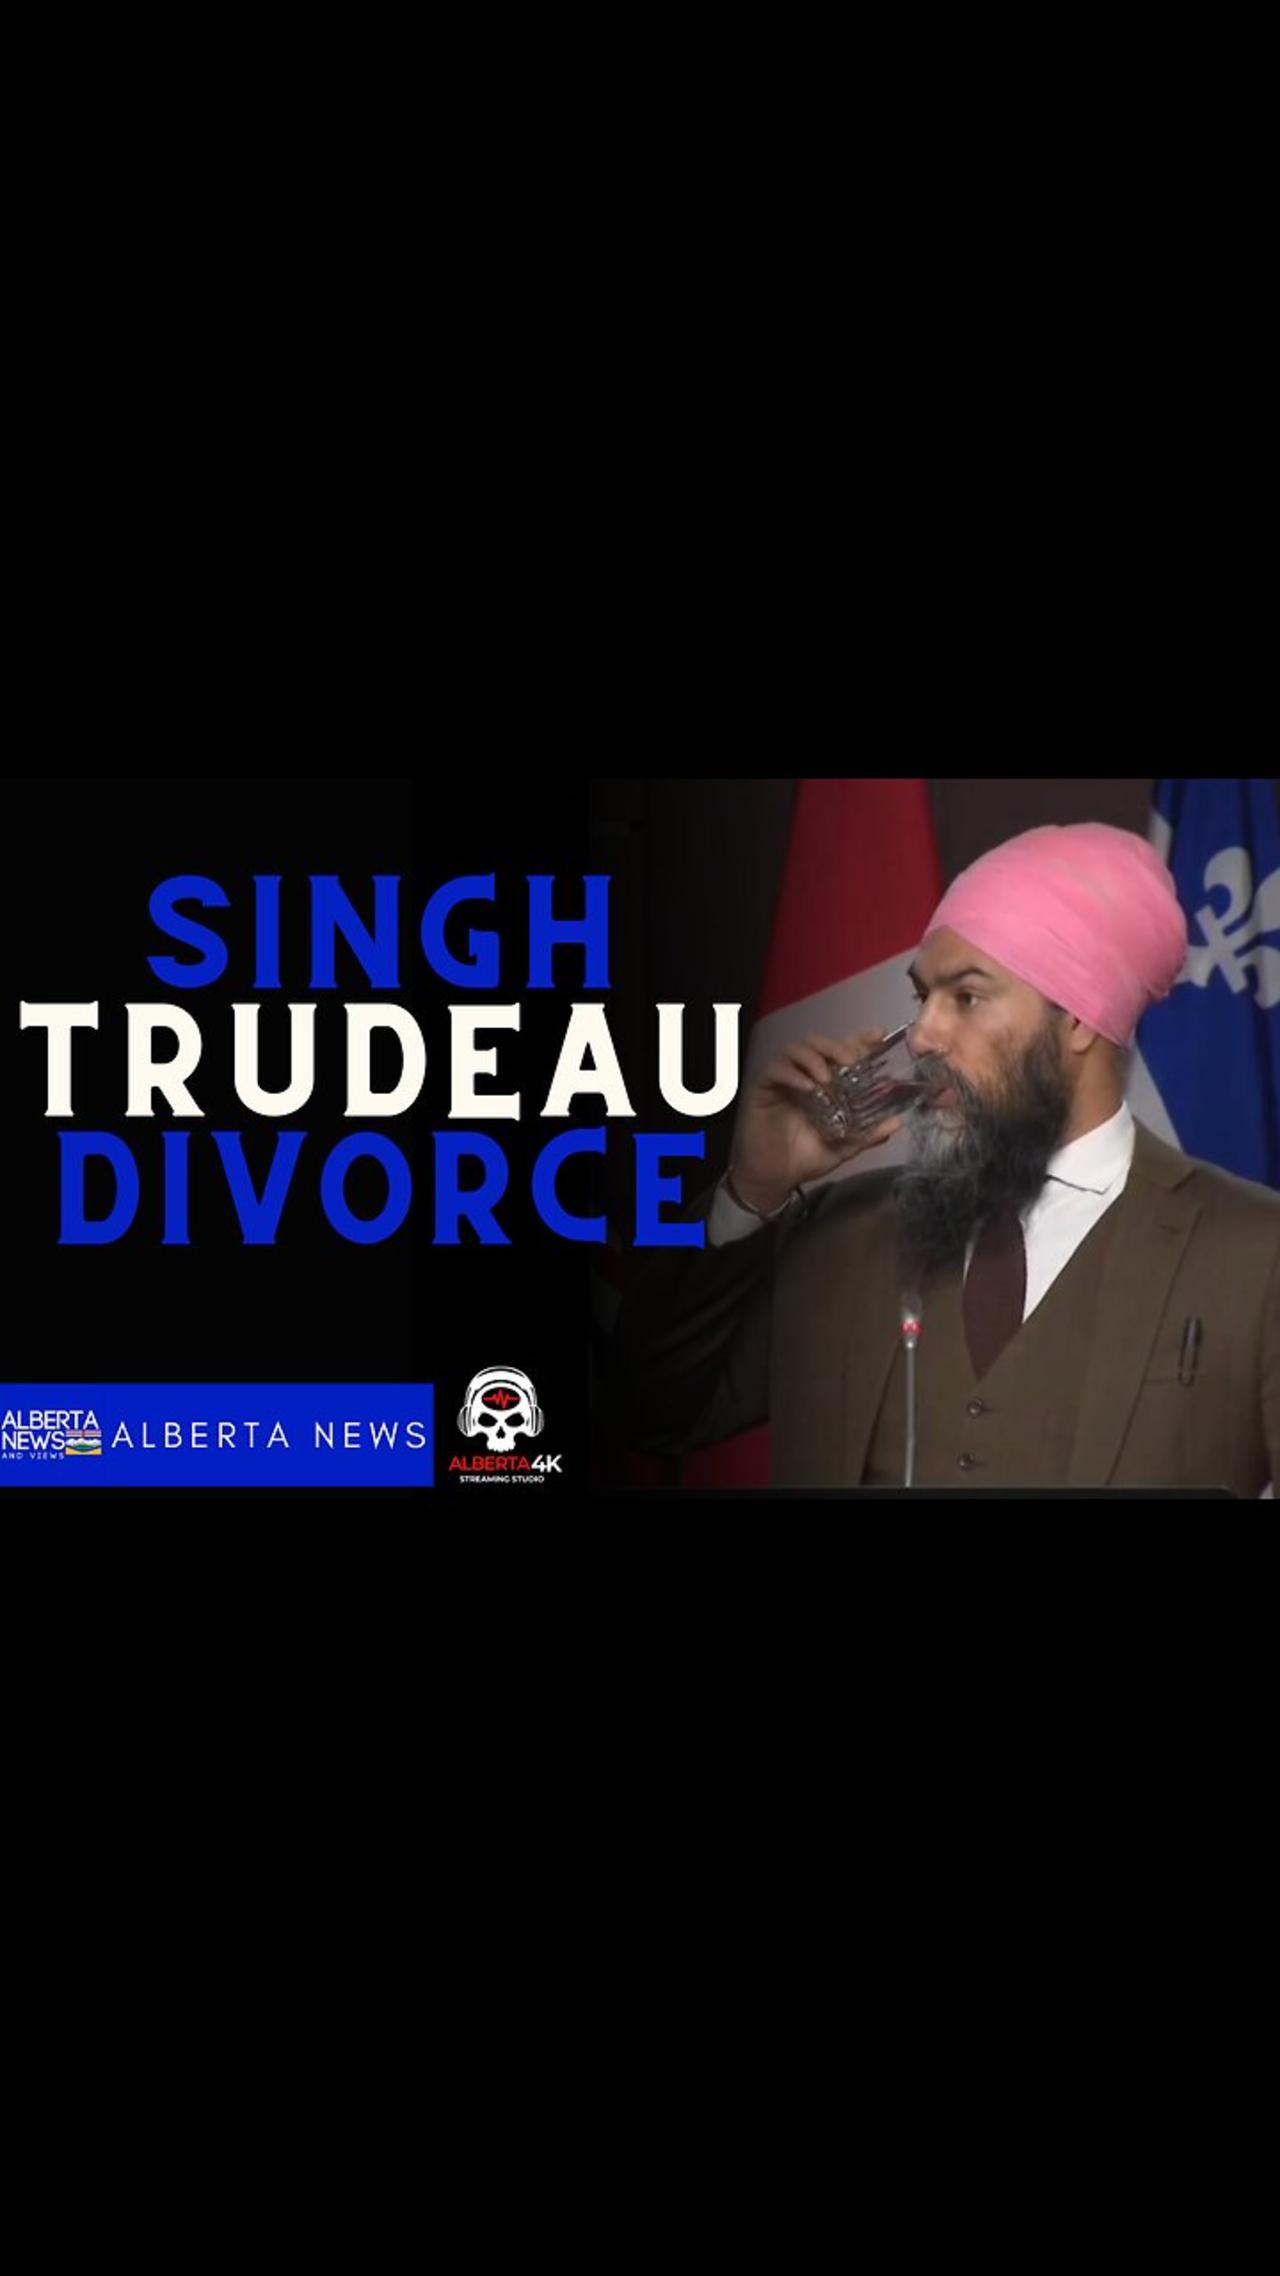 Jagmeet Singh to DUMP Justin Trudeau unless he agrees to wanting more support for Pediatric care.